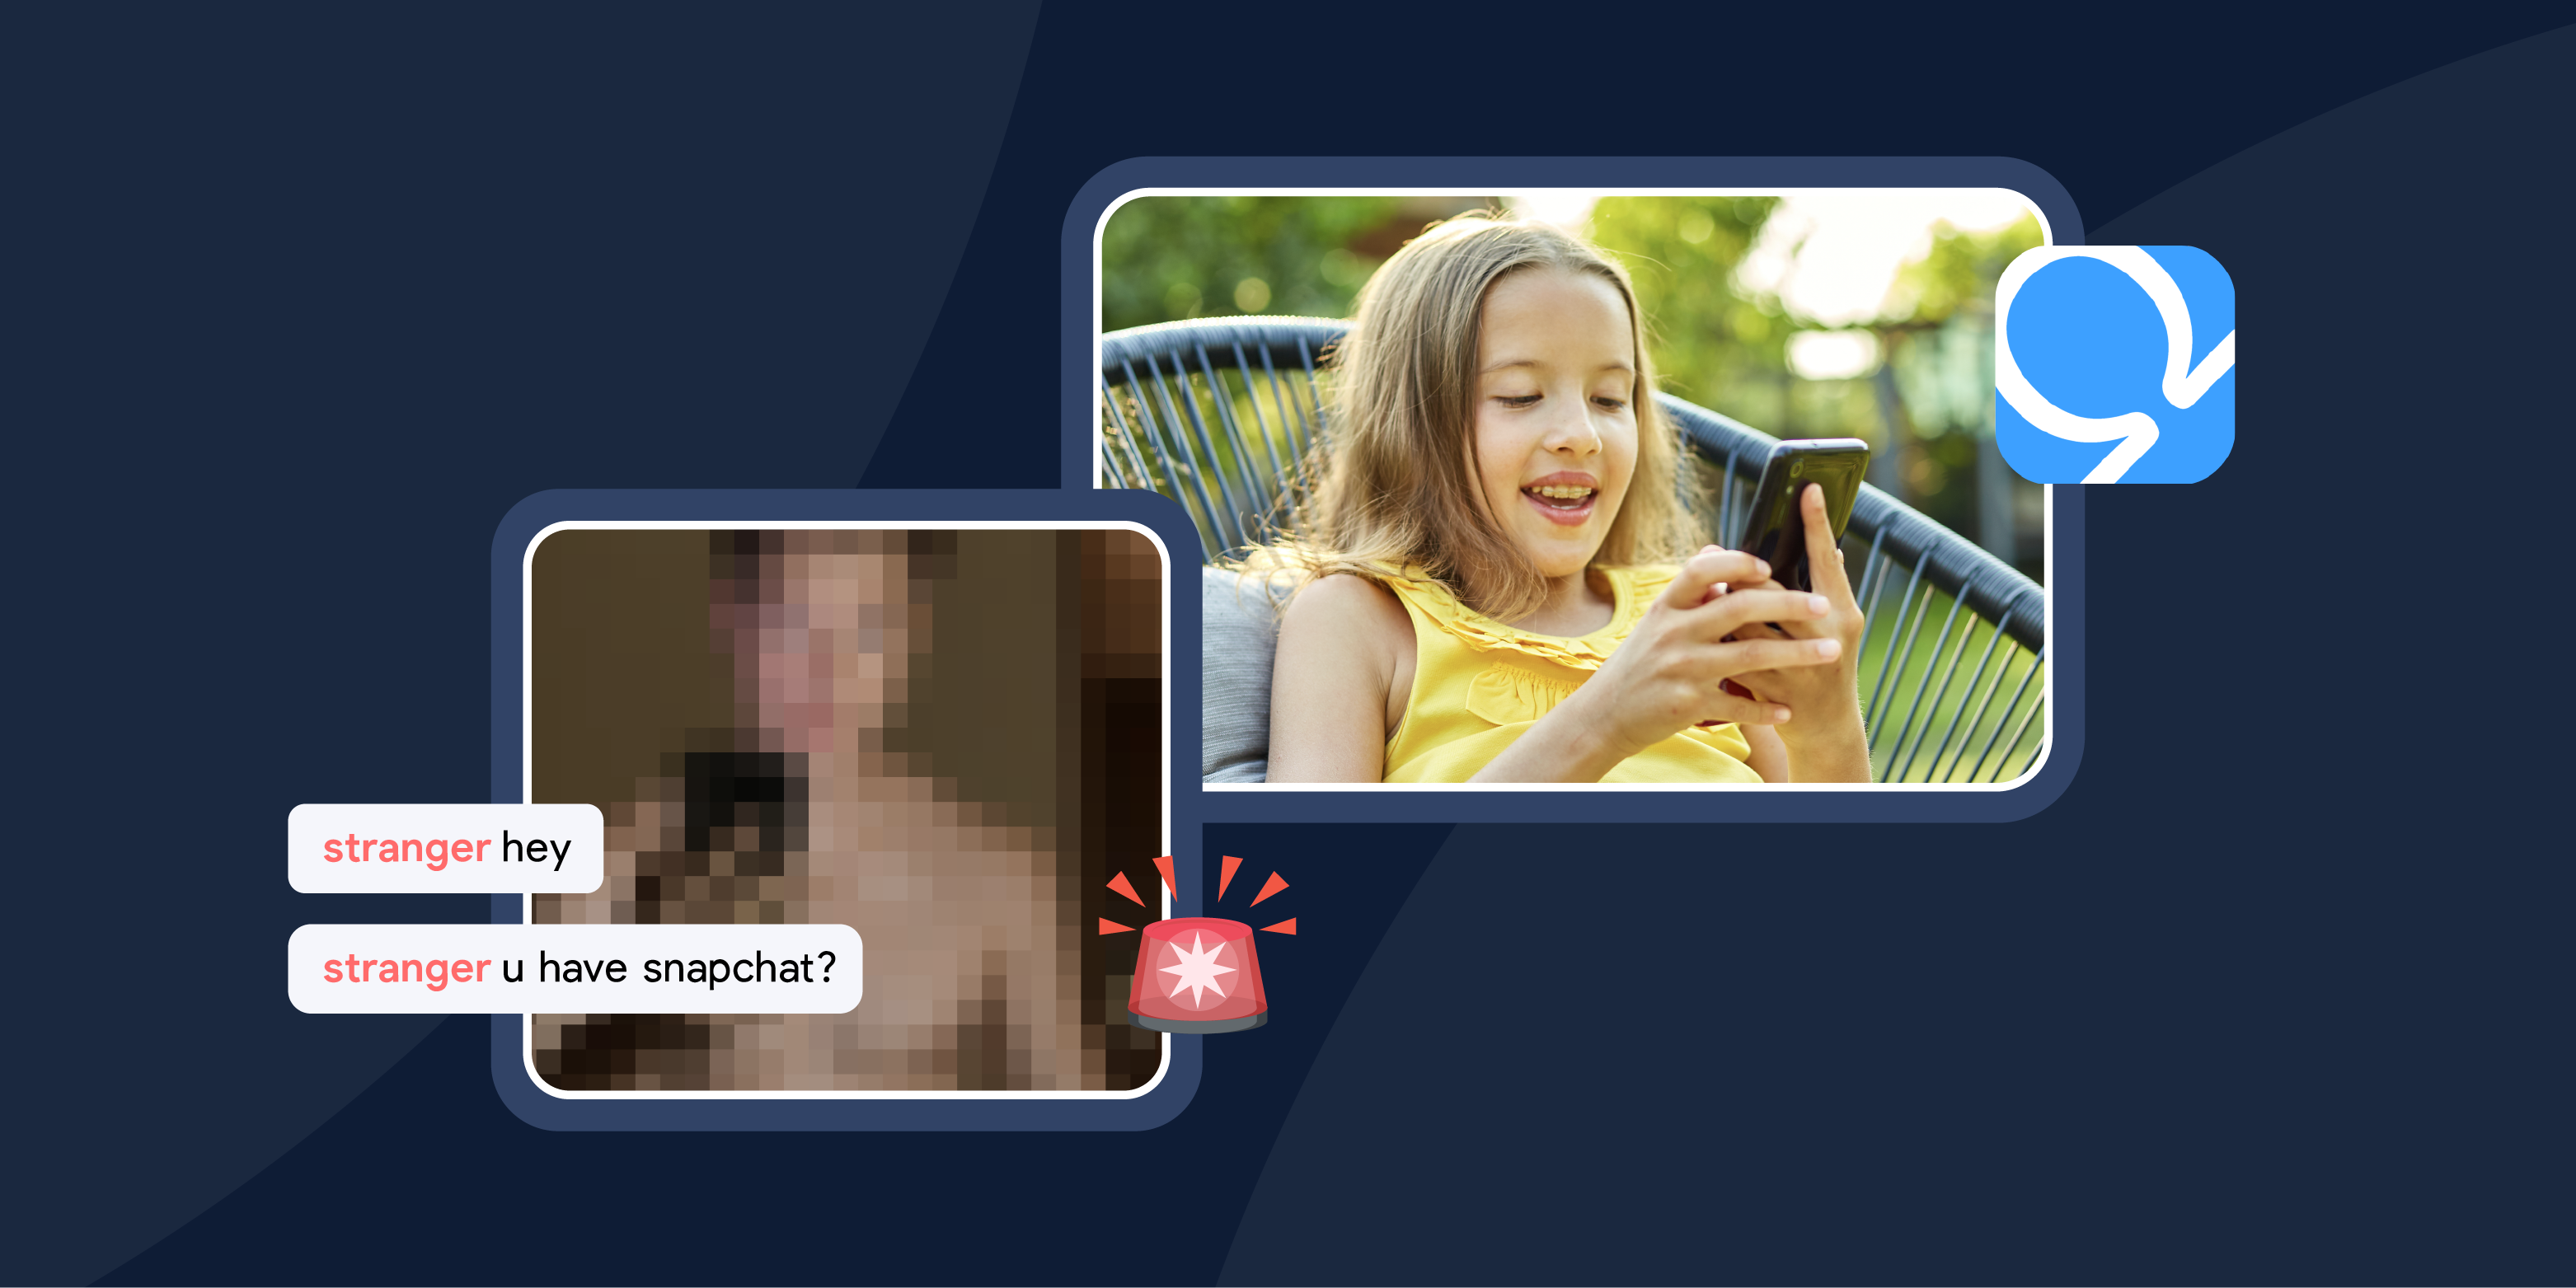 A bare chested boy sends a young smiling girl a message, asking if she has snapchat. 